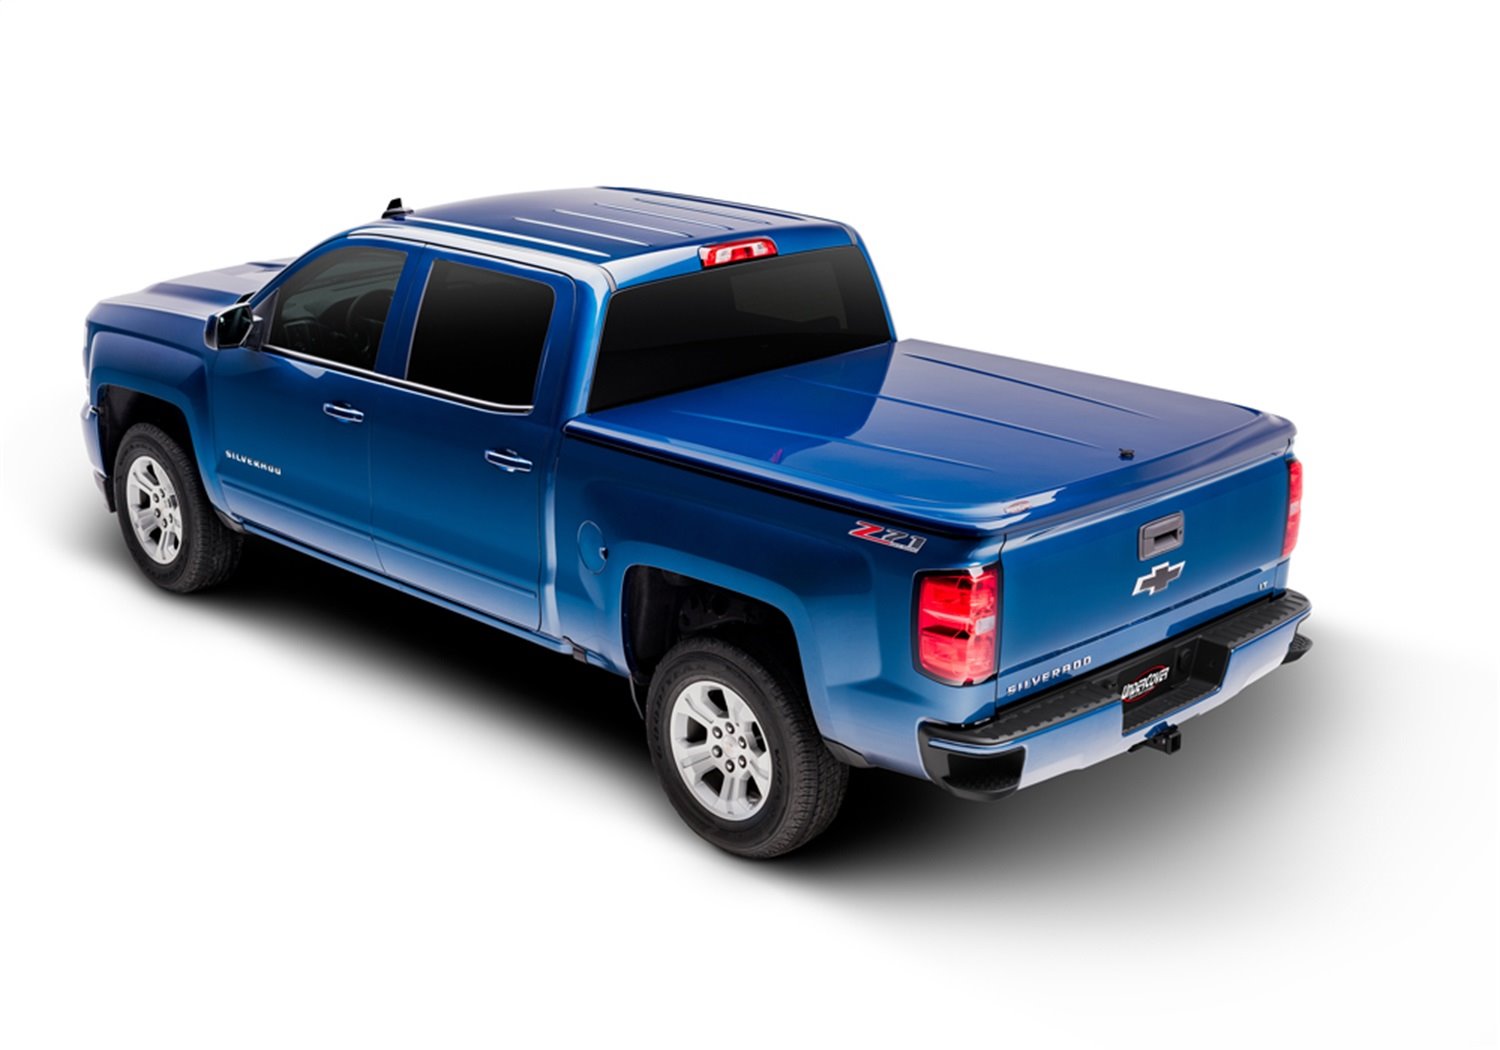 UC3076L-PR4 LUX Hard Non-Folding Cover, 2009-2018 (Select Classic) Ram 1500/2500/3500 6'4" Bed, w/o RamBox, PR4 Flame Red